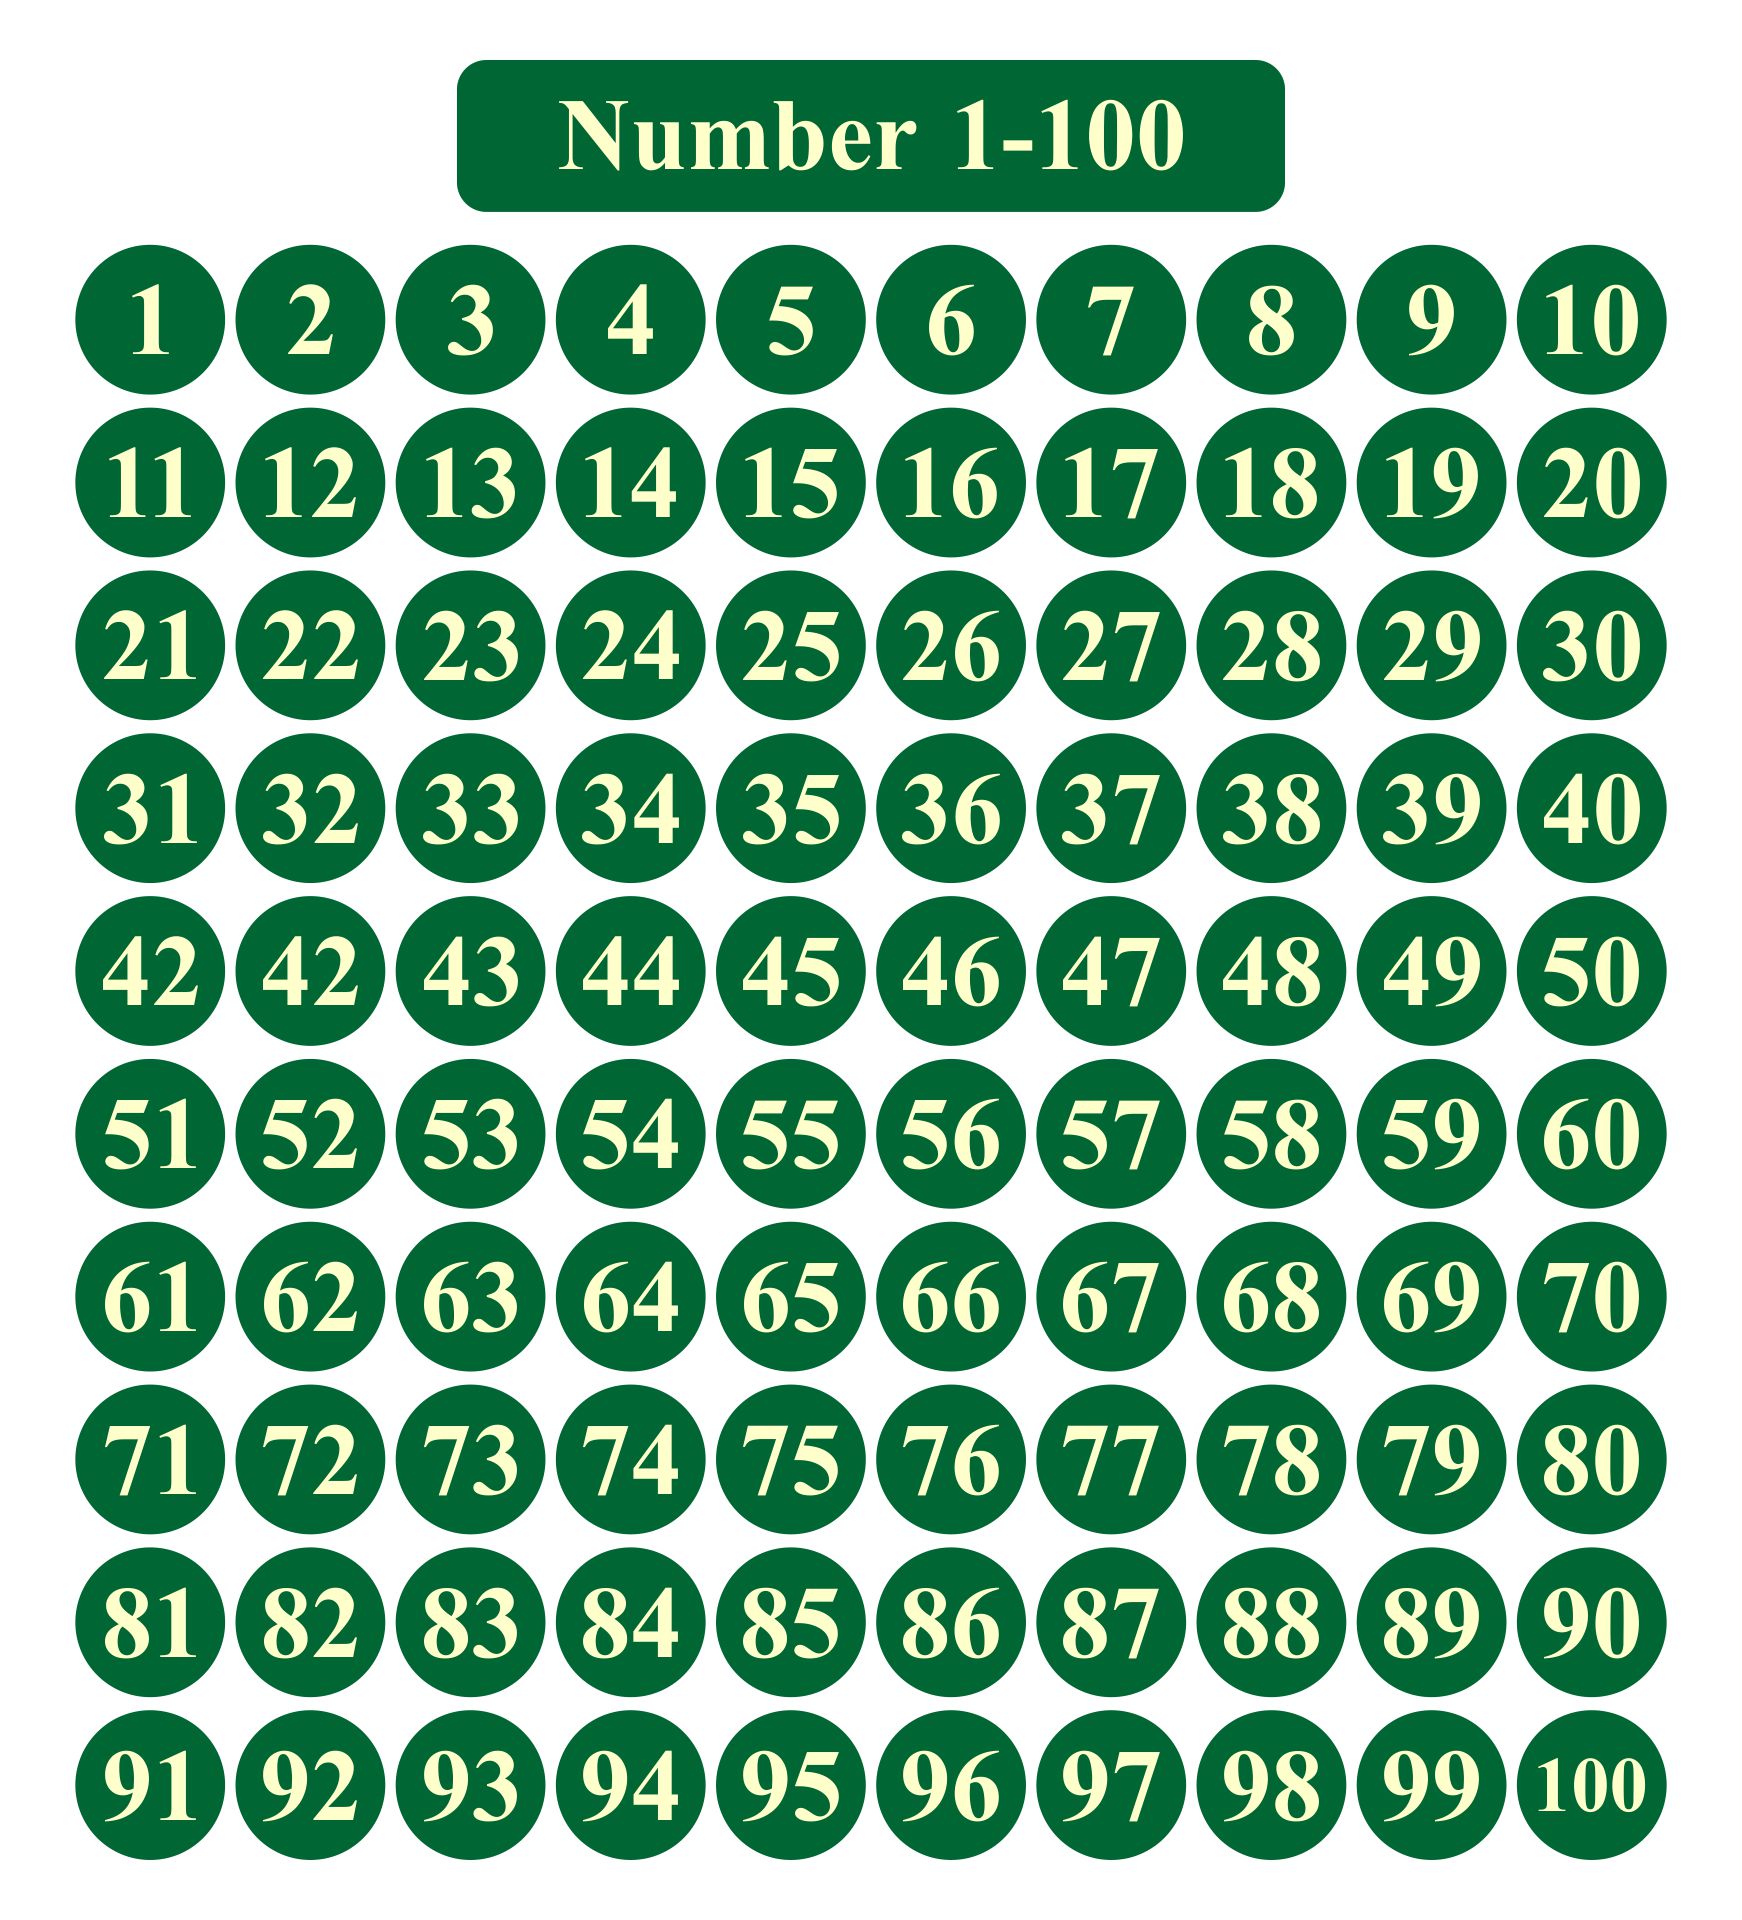 7-best-images-of-number-cards-1-100-printable-number-images-and